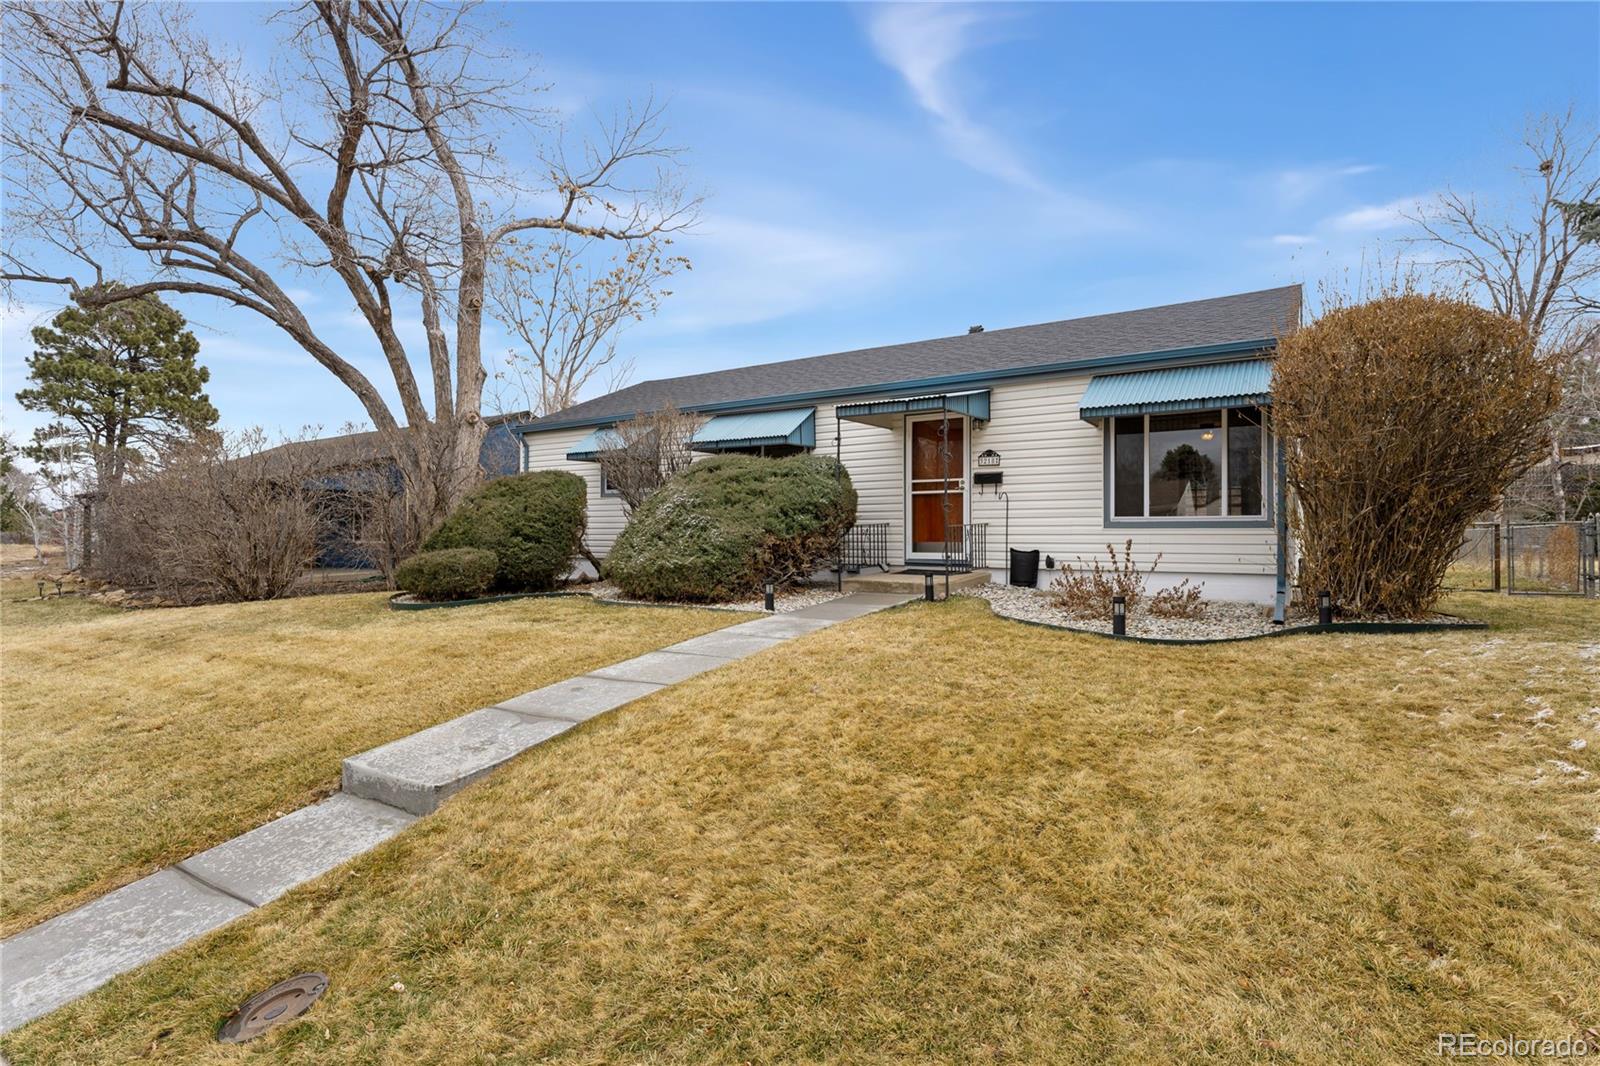 3218 s holly street, Denver sold home. Closed on 2024-04-18 for $590,000.